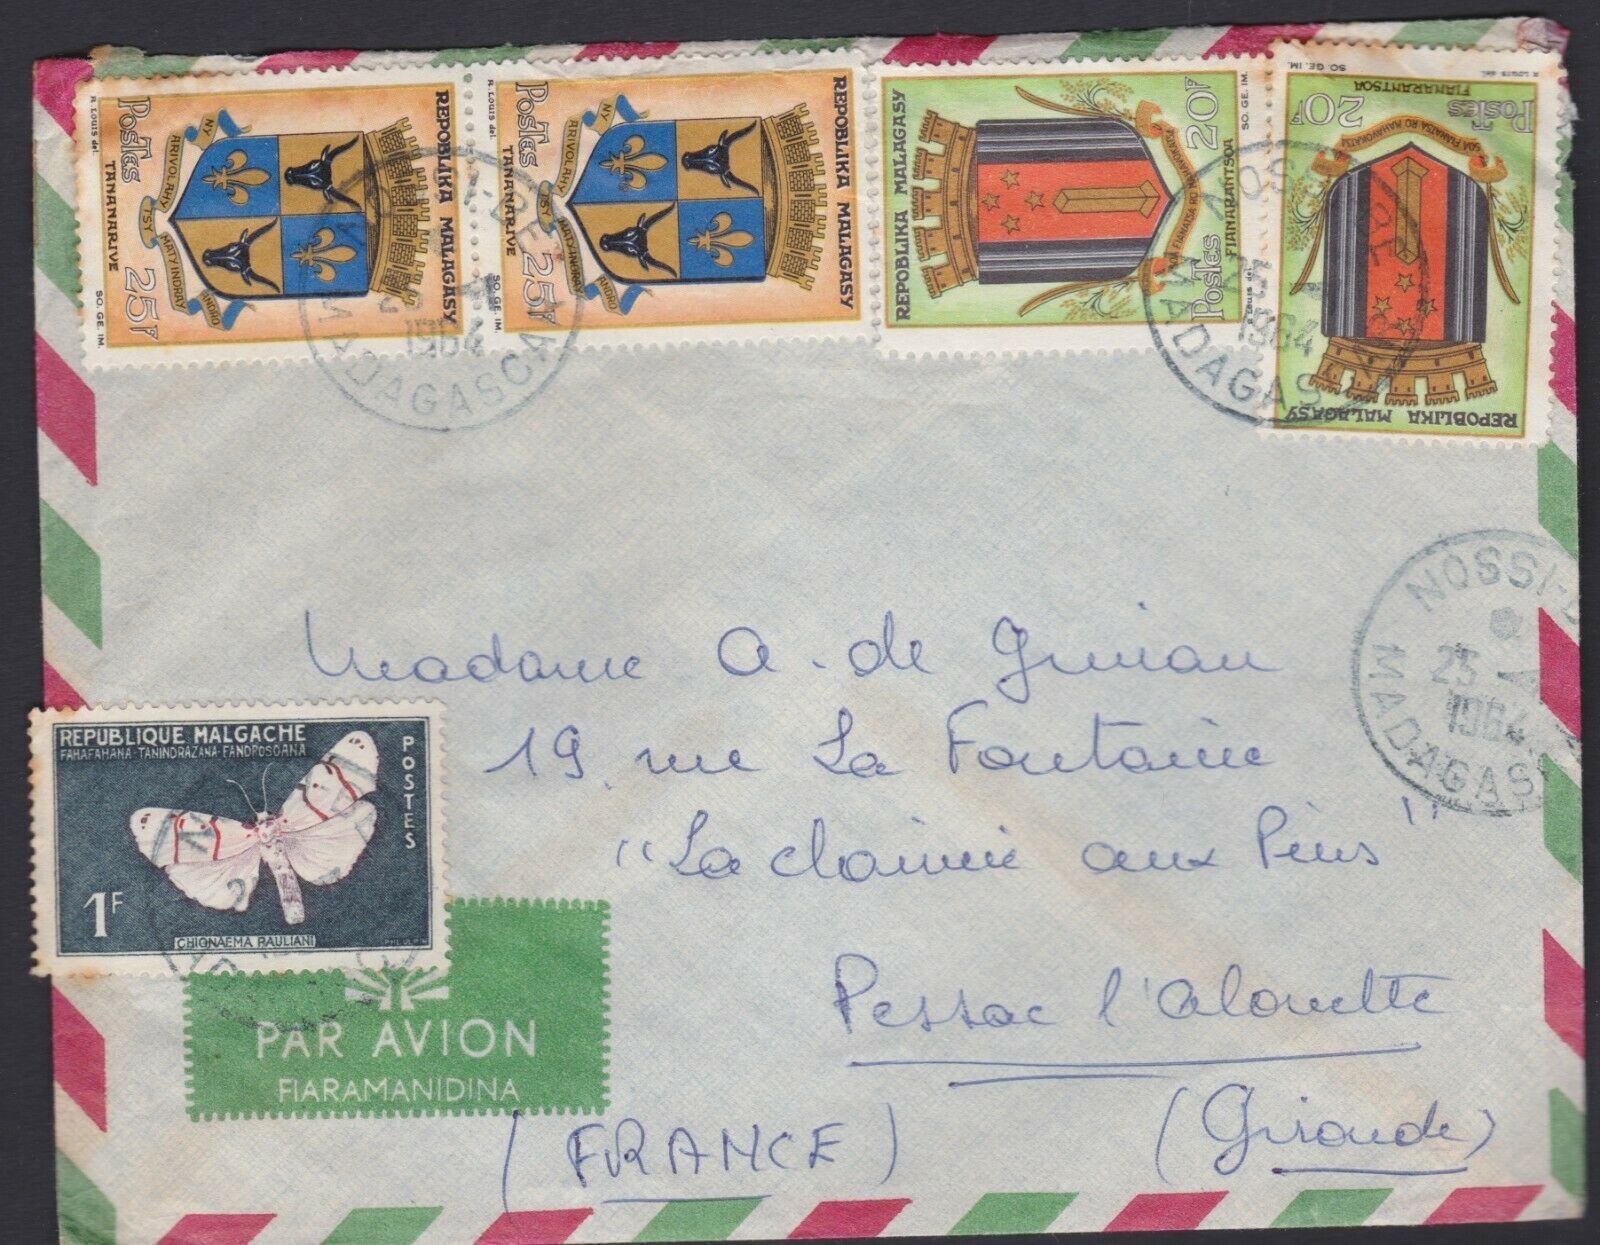 1964 MADAGASCAR MALAGASY Multi Stamp Air Mail Postal Cover to France